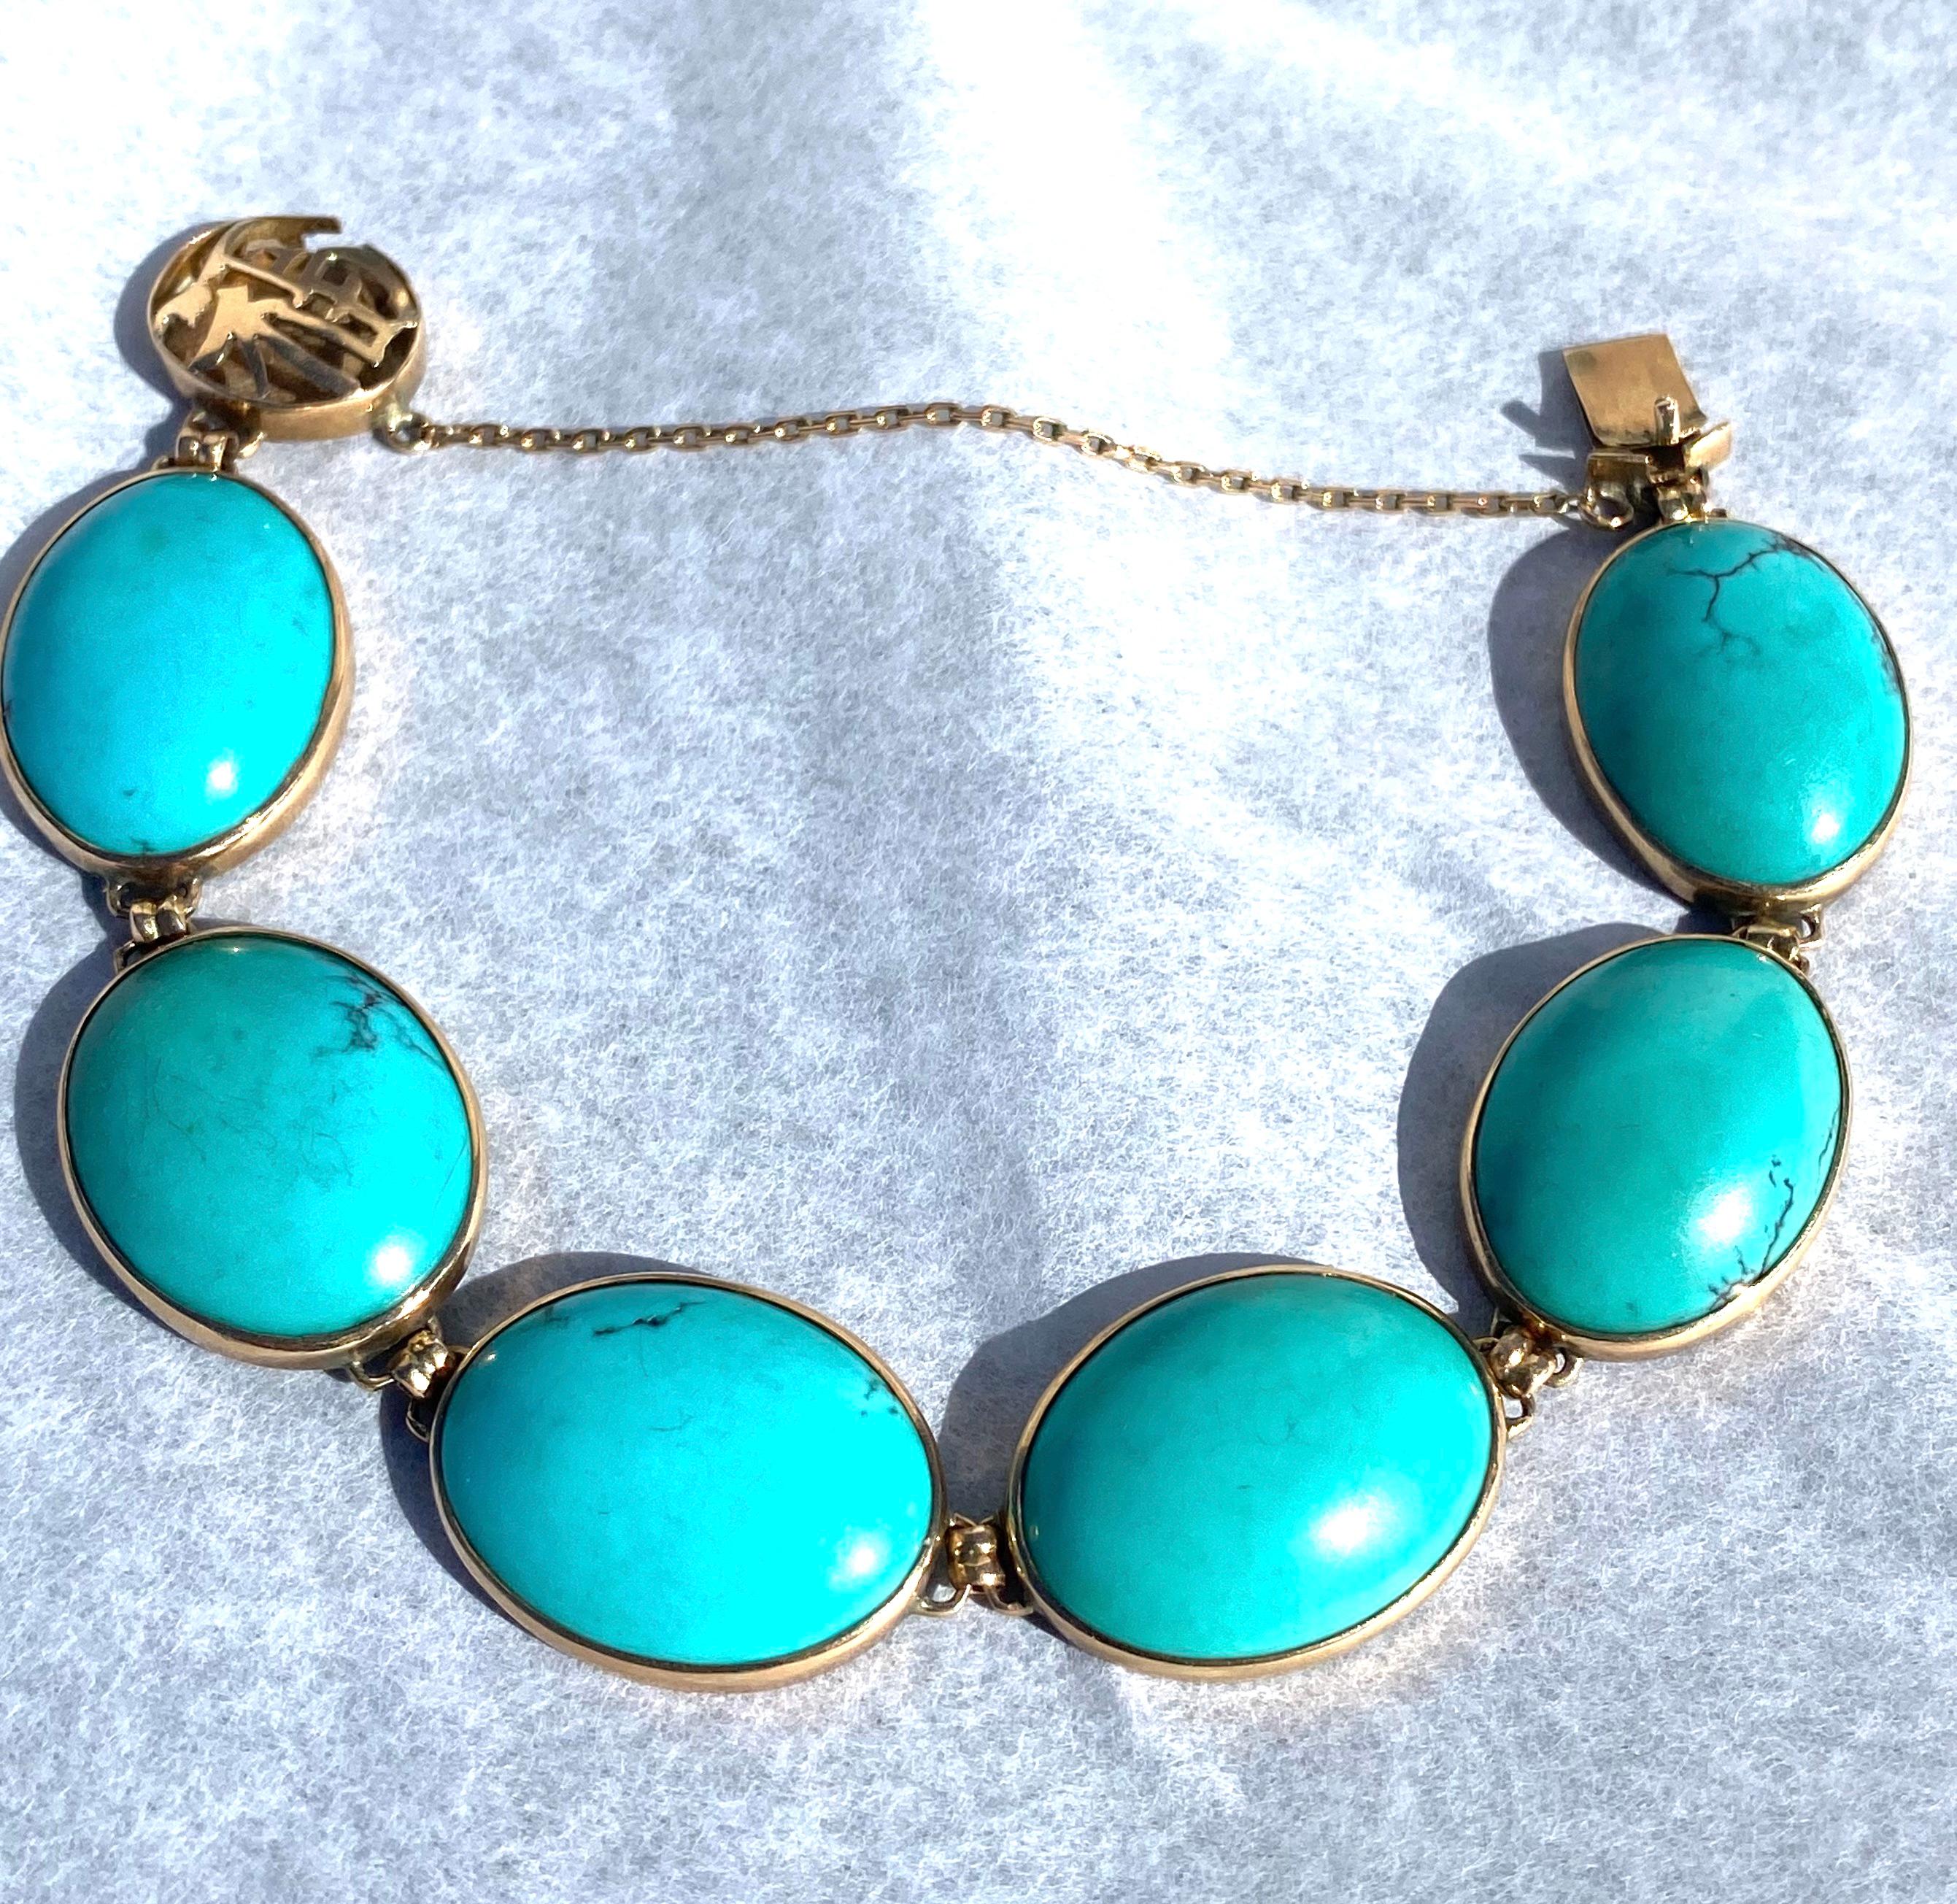 Beautiful Turquoise Link Gold Bracelet set in 14 Karat Yellow Gold.
A gold Asian accented clasp measures 14.30 mm, a safety clasp adorned, while six large oval-shaped Persian-colored turquoise gemstones are set in this lovely bracelet.
The length is